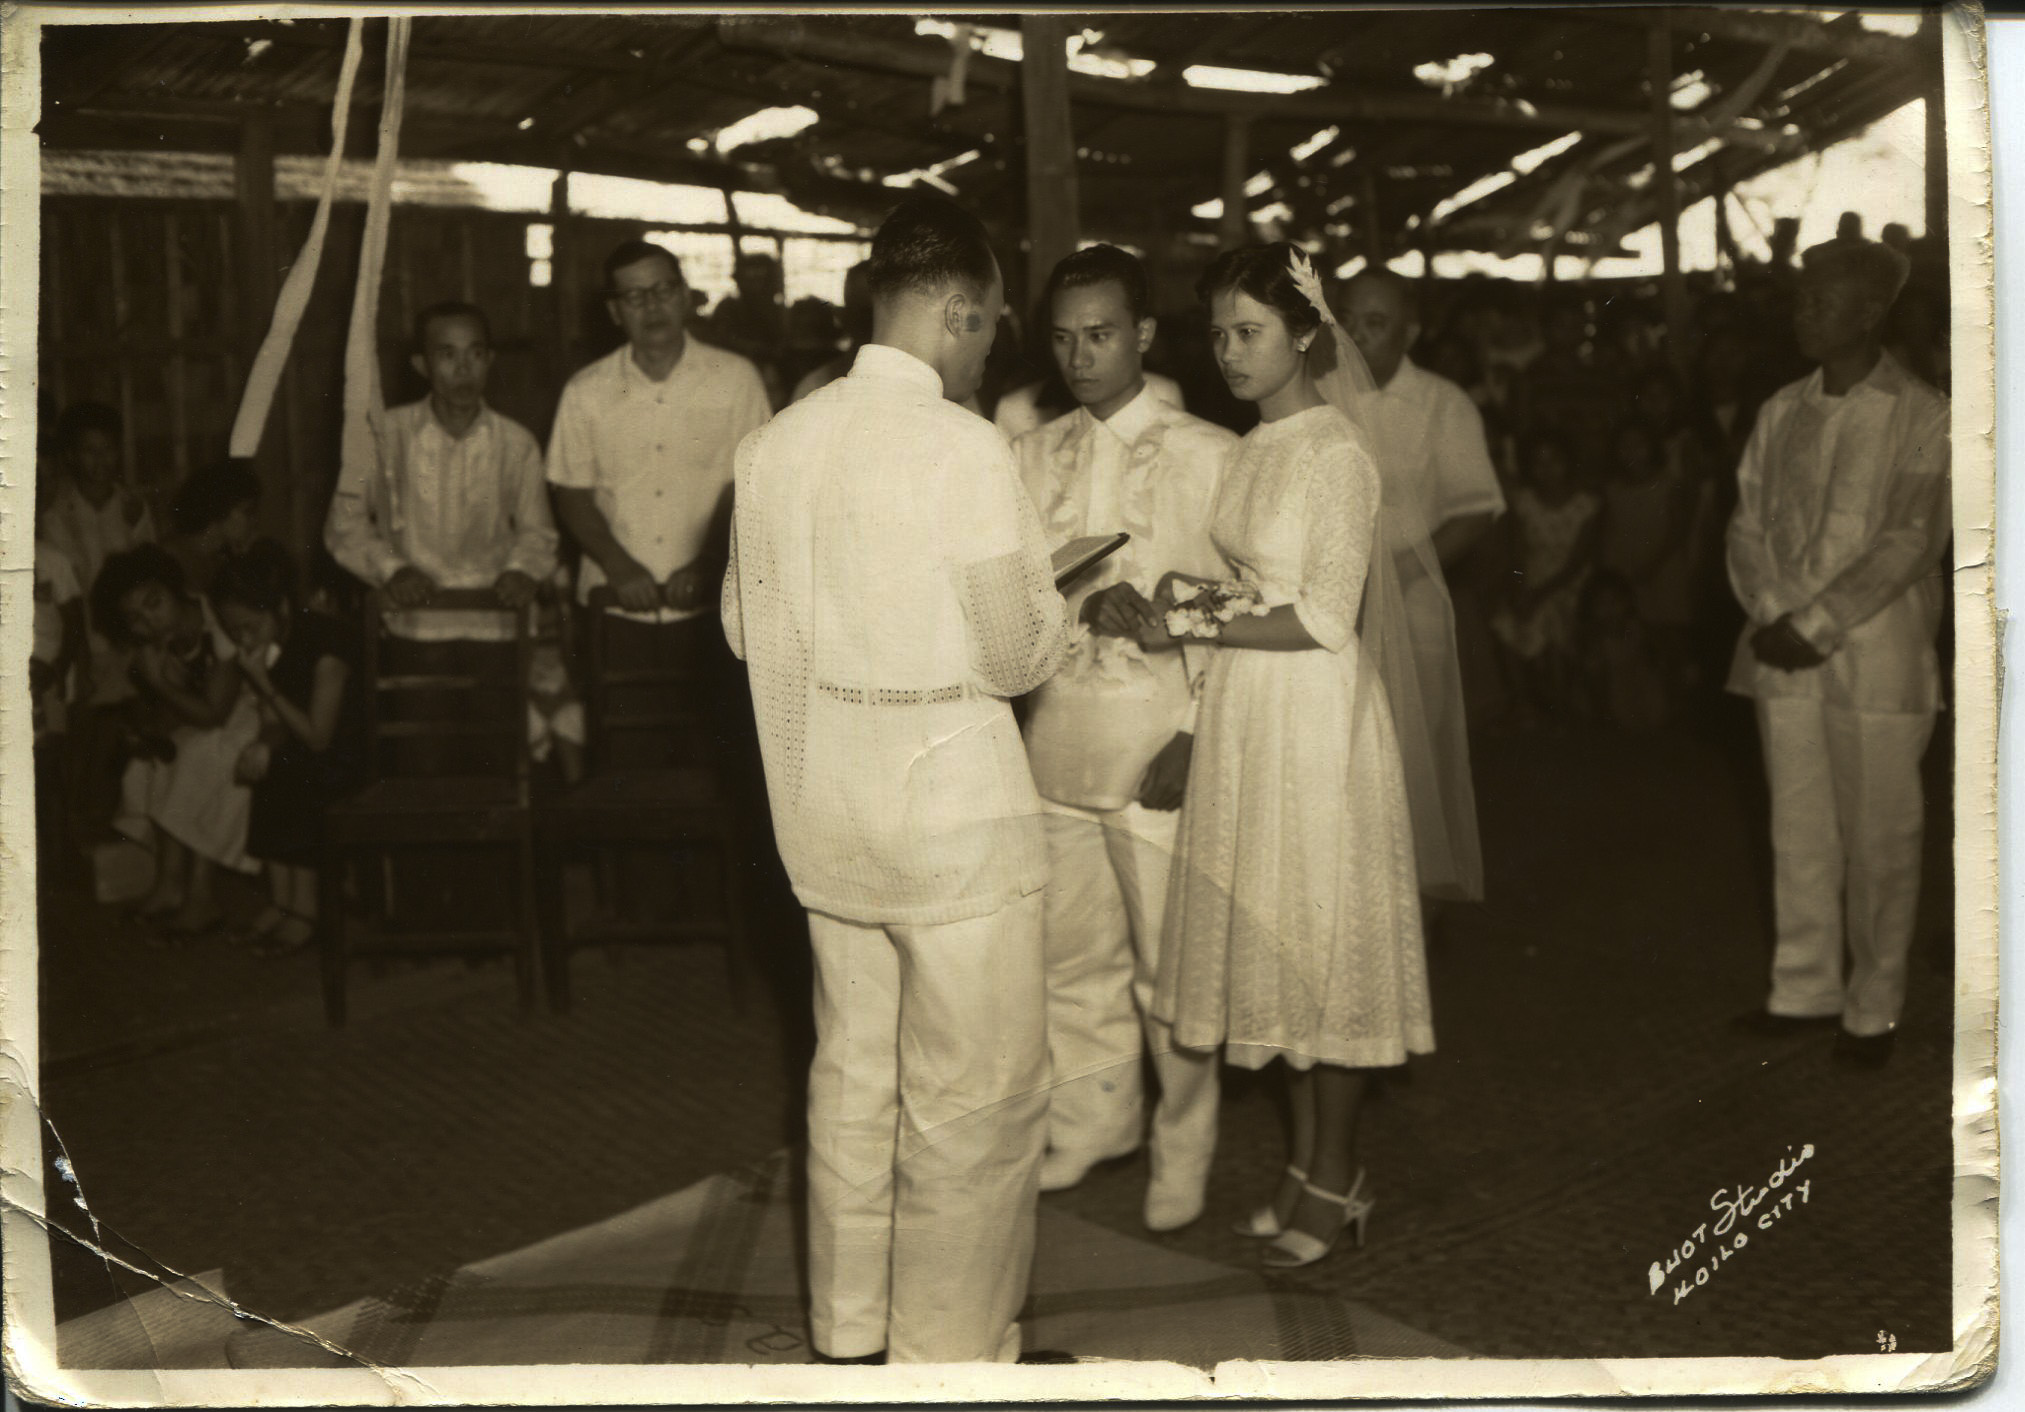 Photo of Arguelles' parents' wedding, 1958.Arguelles acquired it in 2011 after her dad died. The photo was taken on Nasidman Island, Iloilo at Arguelles’ parent’s wedding. The wedding took place in Aglipay Church, which was an Indigenous religion mixed with Catholicism. Text on the photo says: “Buot StudioIloilo City”. Pictured: Pastor, Jose Arguelles (dad “Tay”), Magdalena (mom “Nay”), Pedro B Molina (maternal grandfather, mayor of Ajuy). Arguelles’ mom was an oldest child. She was the first nurse in her family and sent all her siblings to school. Arguelles’dad was a second child and also sent all his siblings to school. Arguelles said her parents coming together is symbolic of the future of the Philippines at that time. Her parent’s generation is still very involved in the Philippines. Hundreds of people like them helpedothers, though they themselves came from nothing. Any views, findings, conclusions, or recommendations expressed in this story do not necessarily represent those of the National Endowment for the Humanities. (c) Field Museum of Natural History - CC BY-NC 4.0